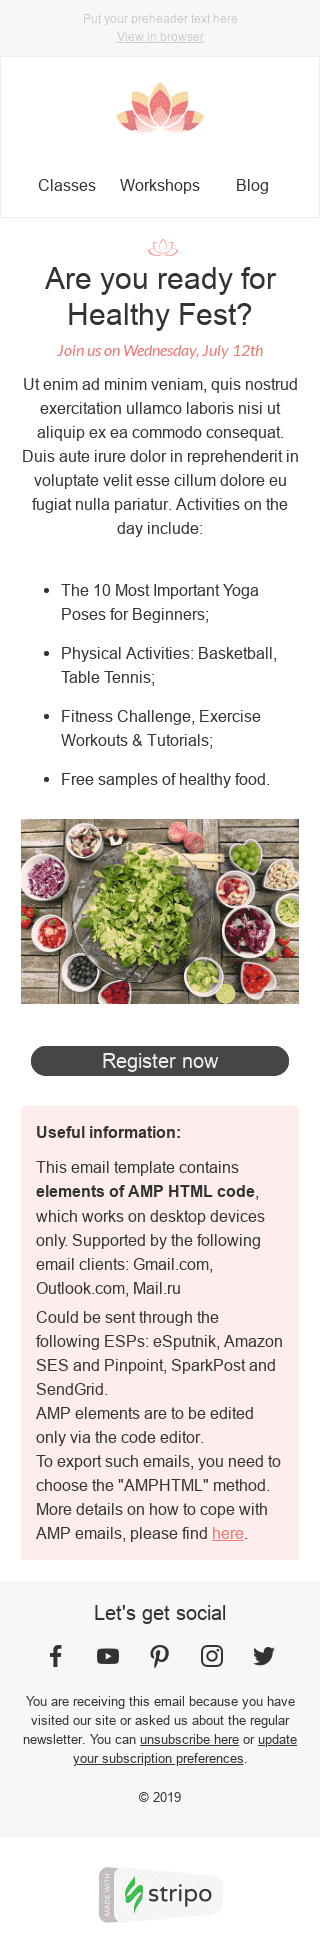 Invitation Email Template «Healthy Fest» for Food industry mobile view